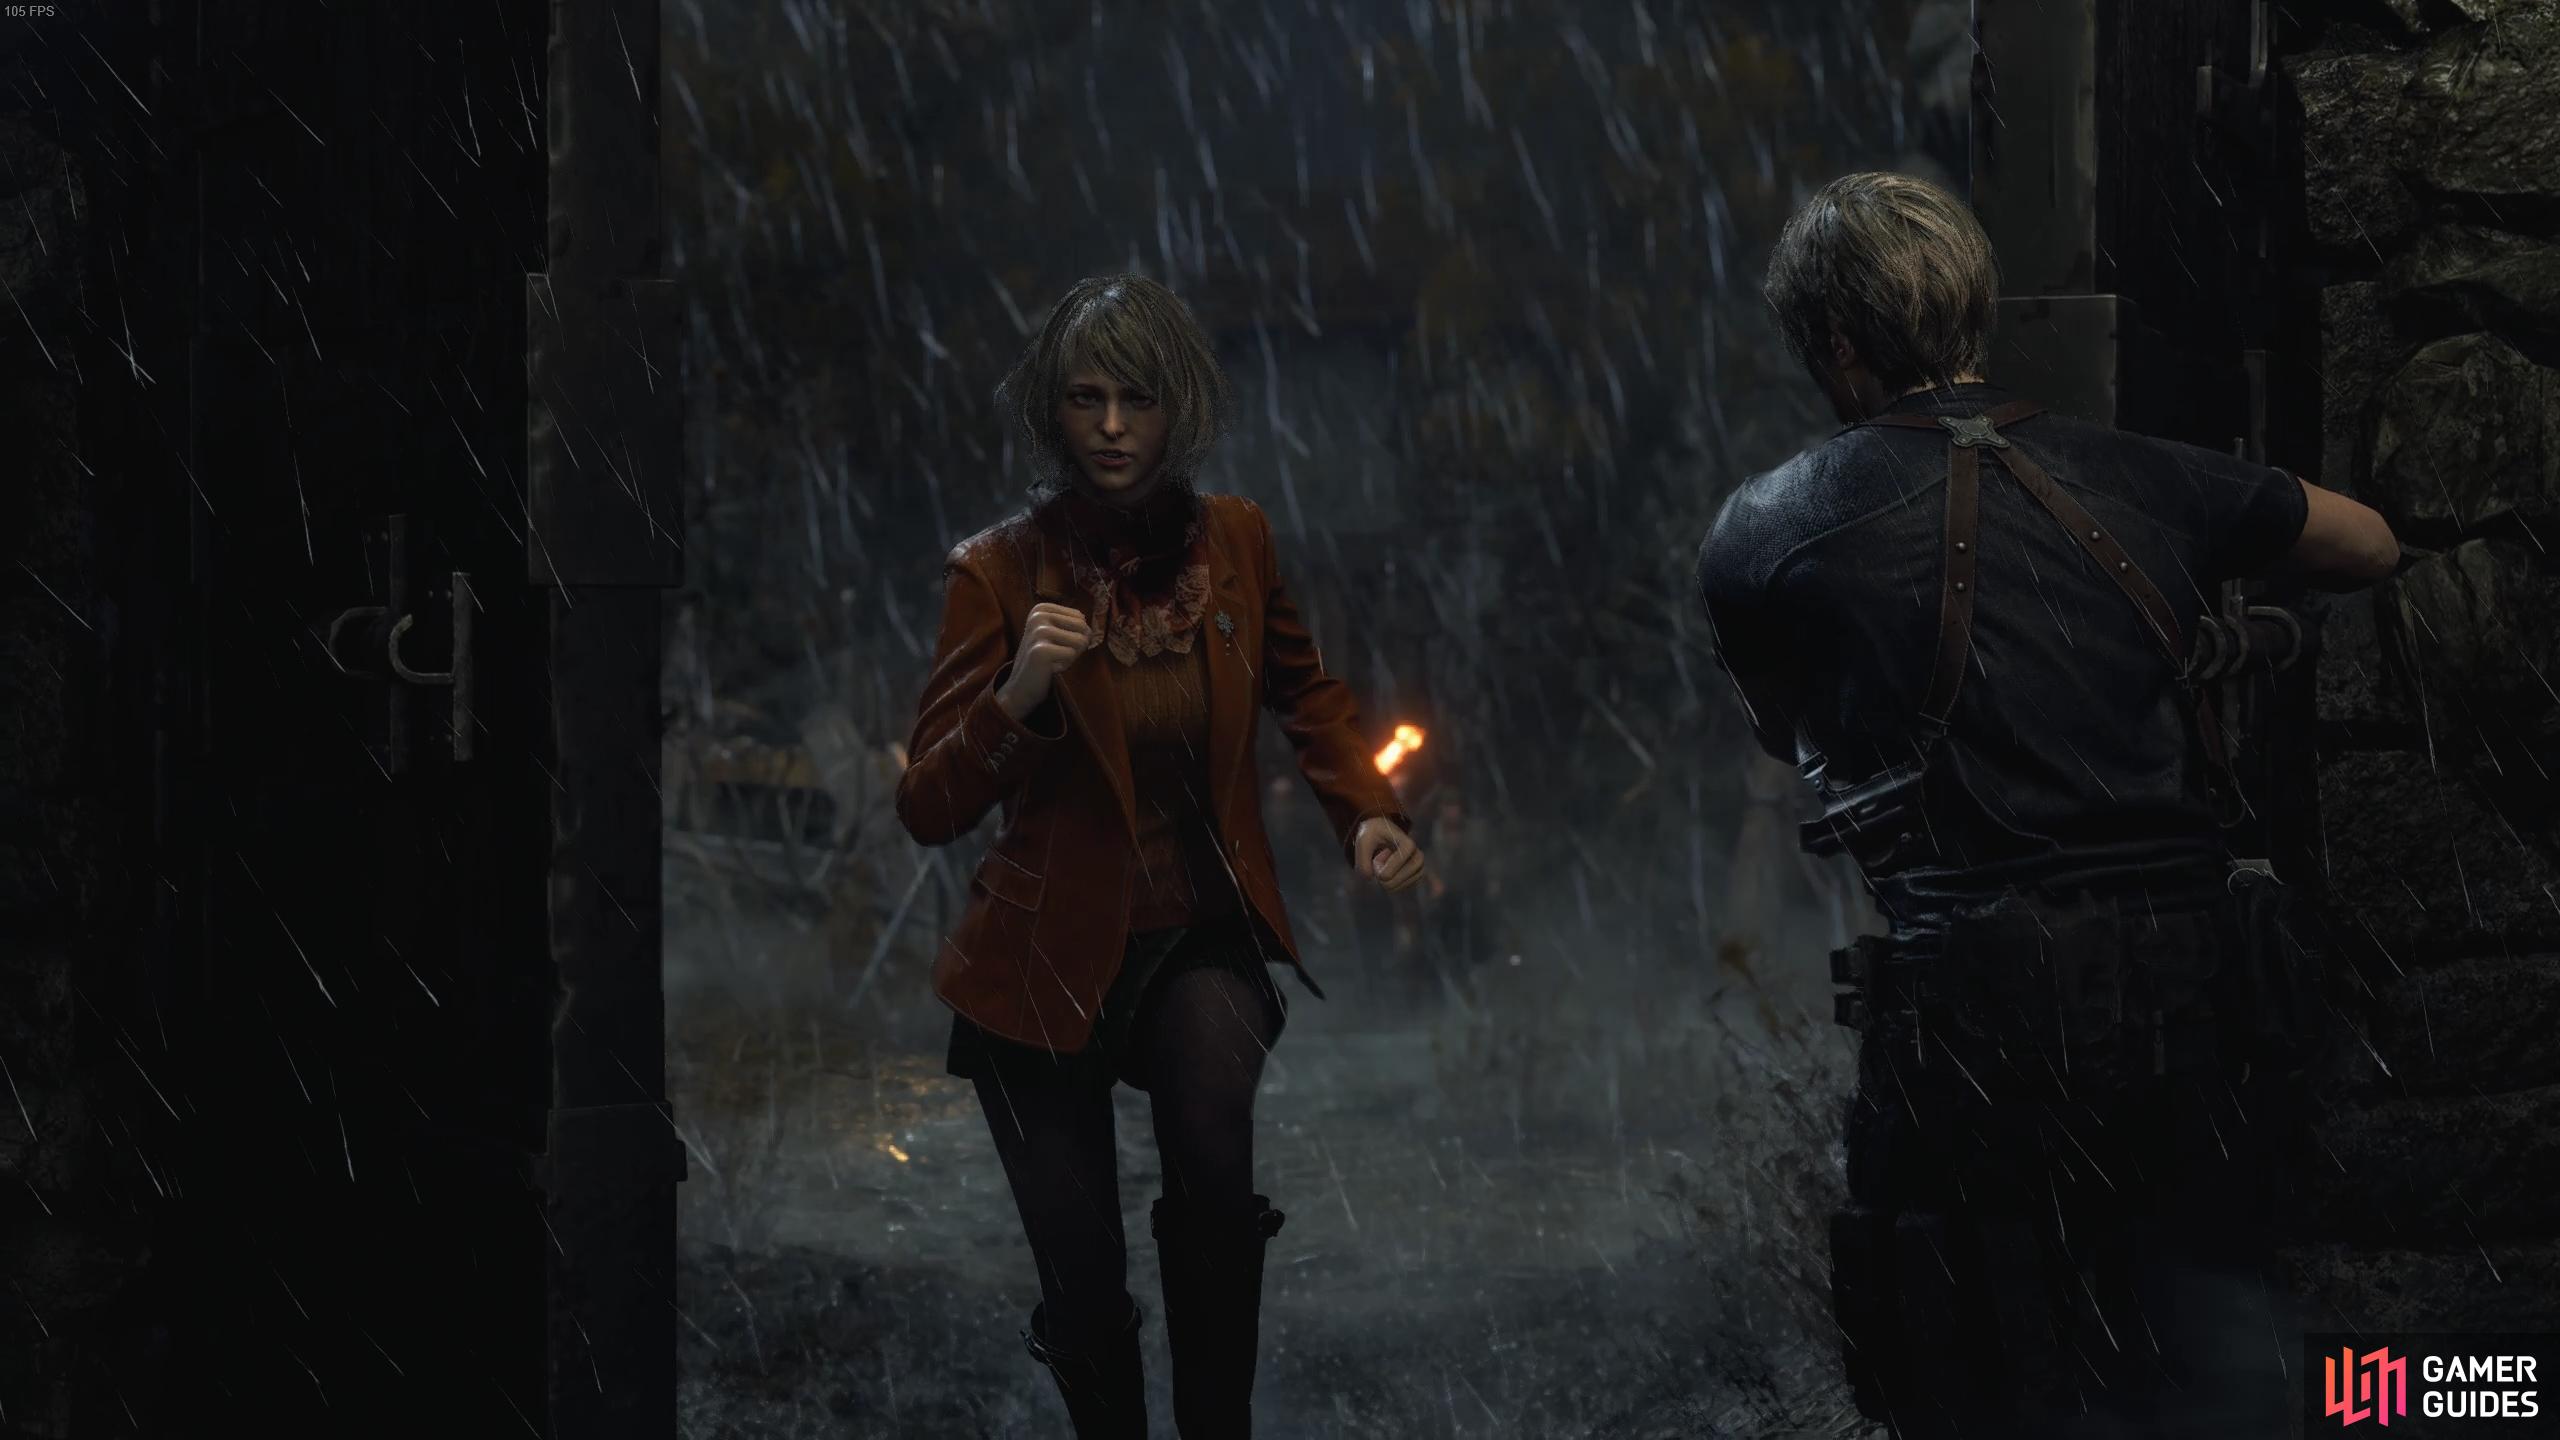 Stand Your Ground, Chapter 5 of Resident Evil 4 Remake.